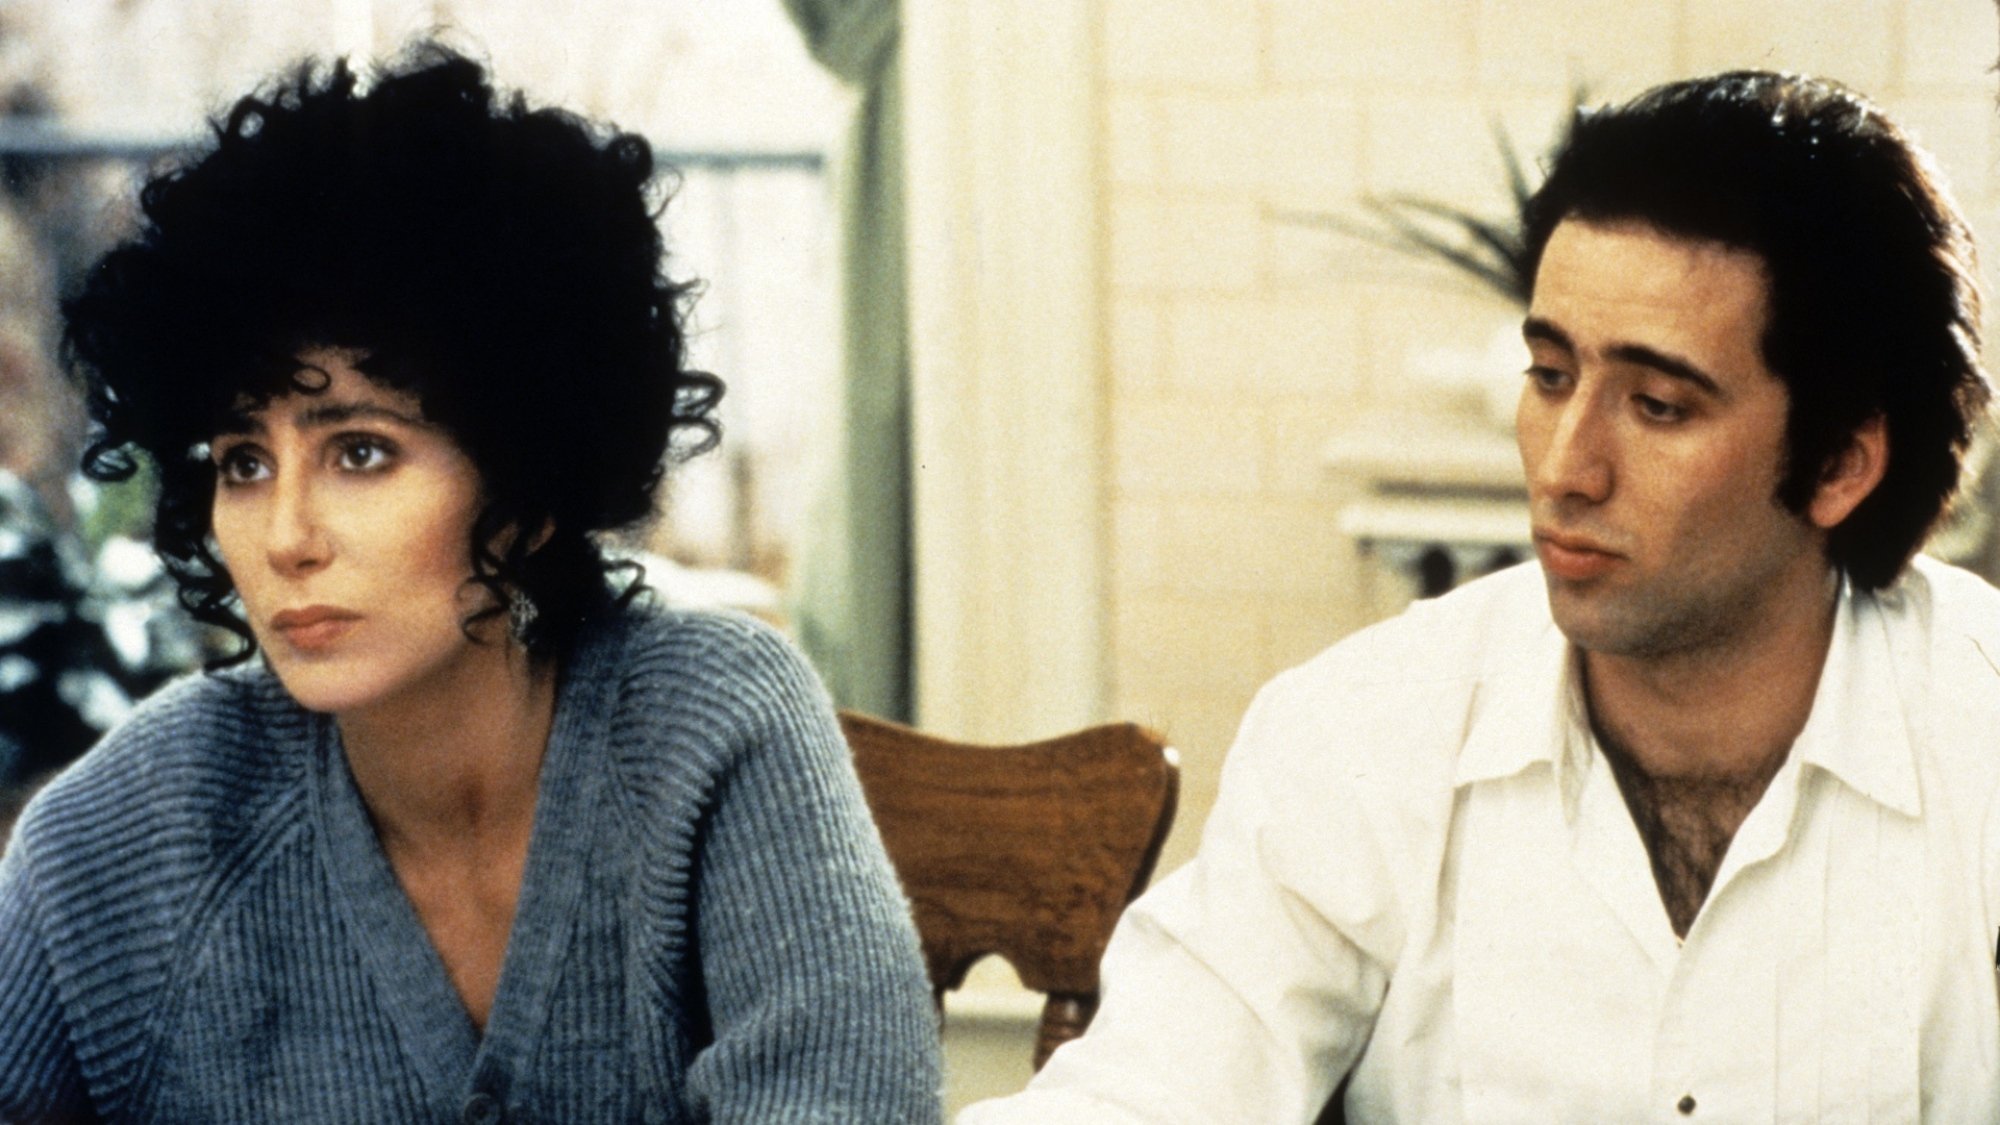 Cher and Nicolas Cage in "Moonstruck."